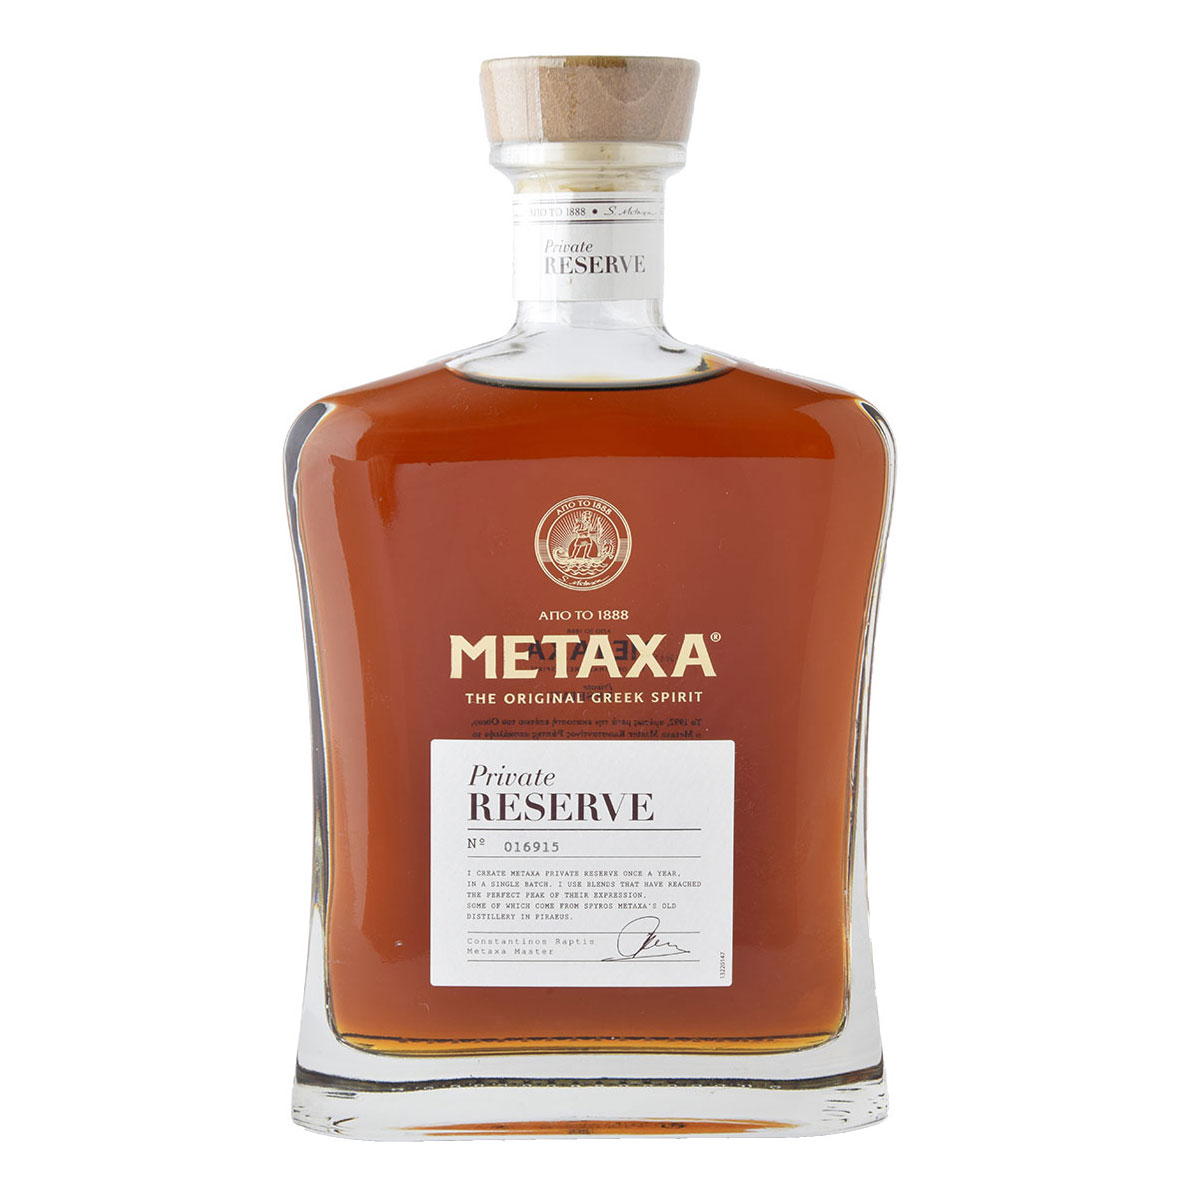 a bottle of metaxa private reserve